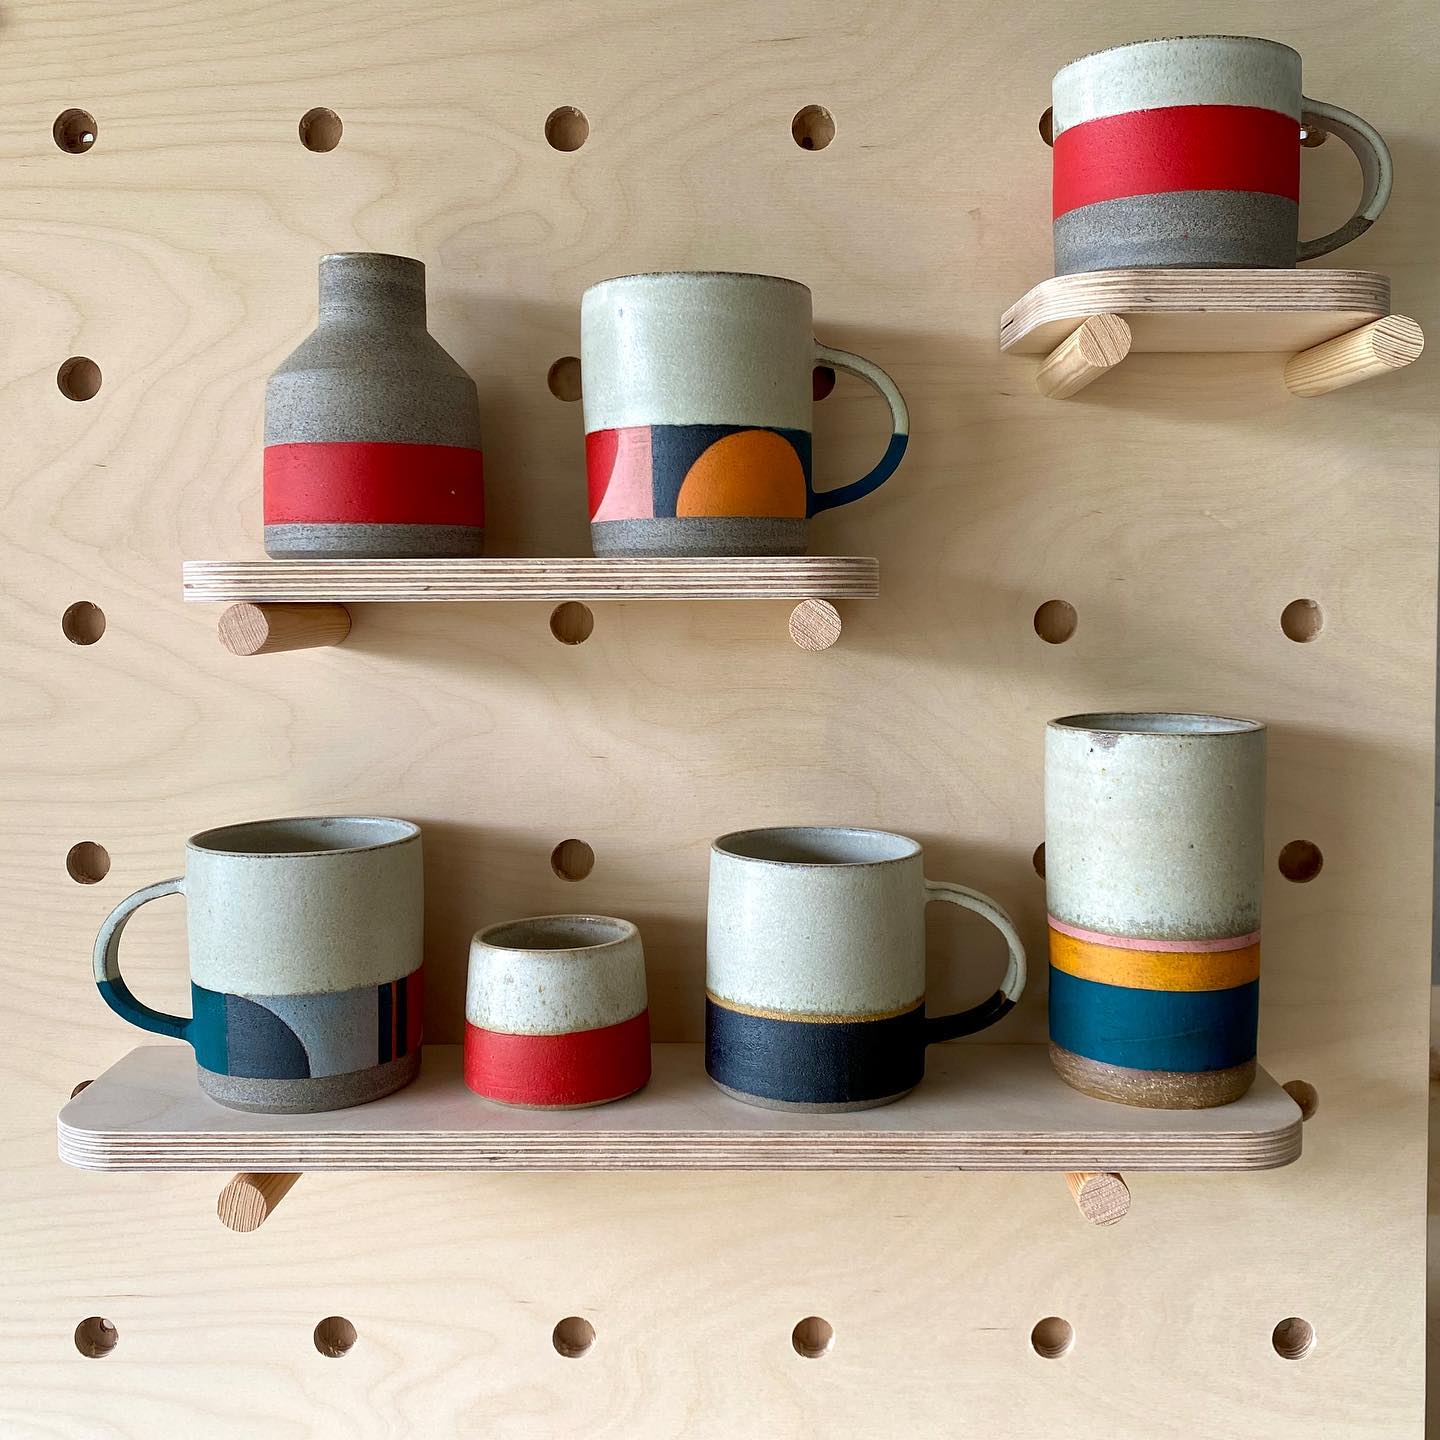 Mugs on a wooden shelf with pegs, offering clever storage for a more efficient home.